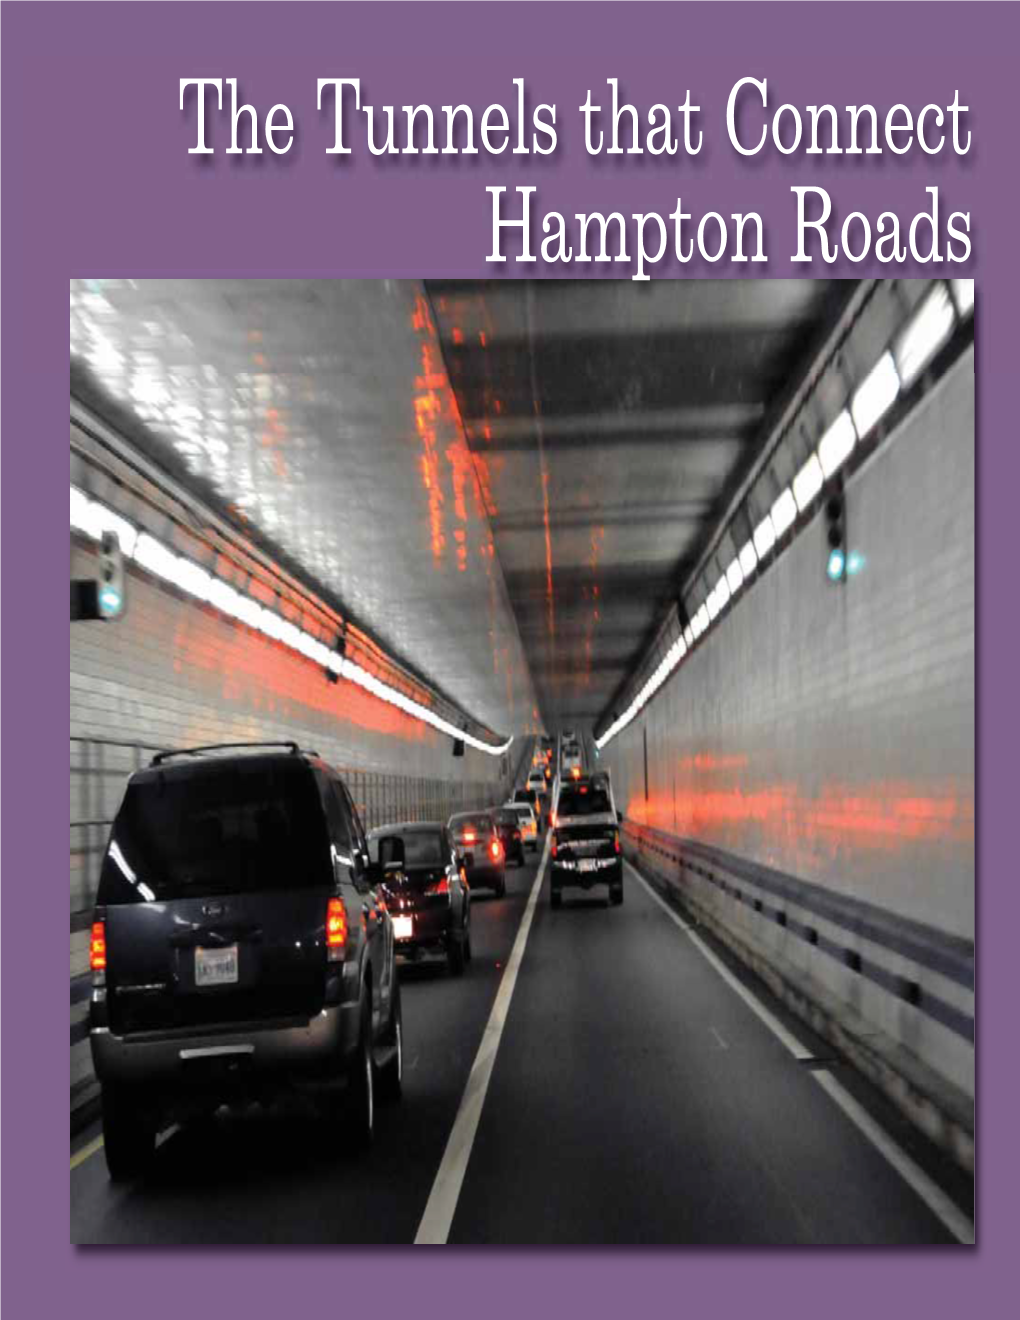 The Tunnels That Connect Hampton Roads 2009 State of the Region Booklet:Layout 1 9/3/09 11:02 AM Page 126